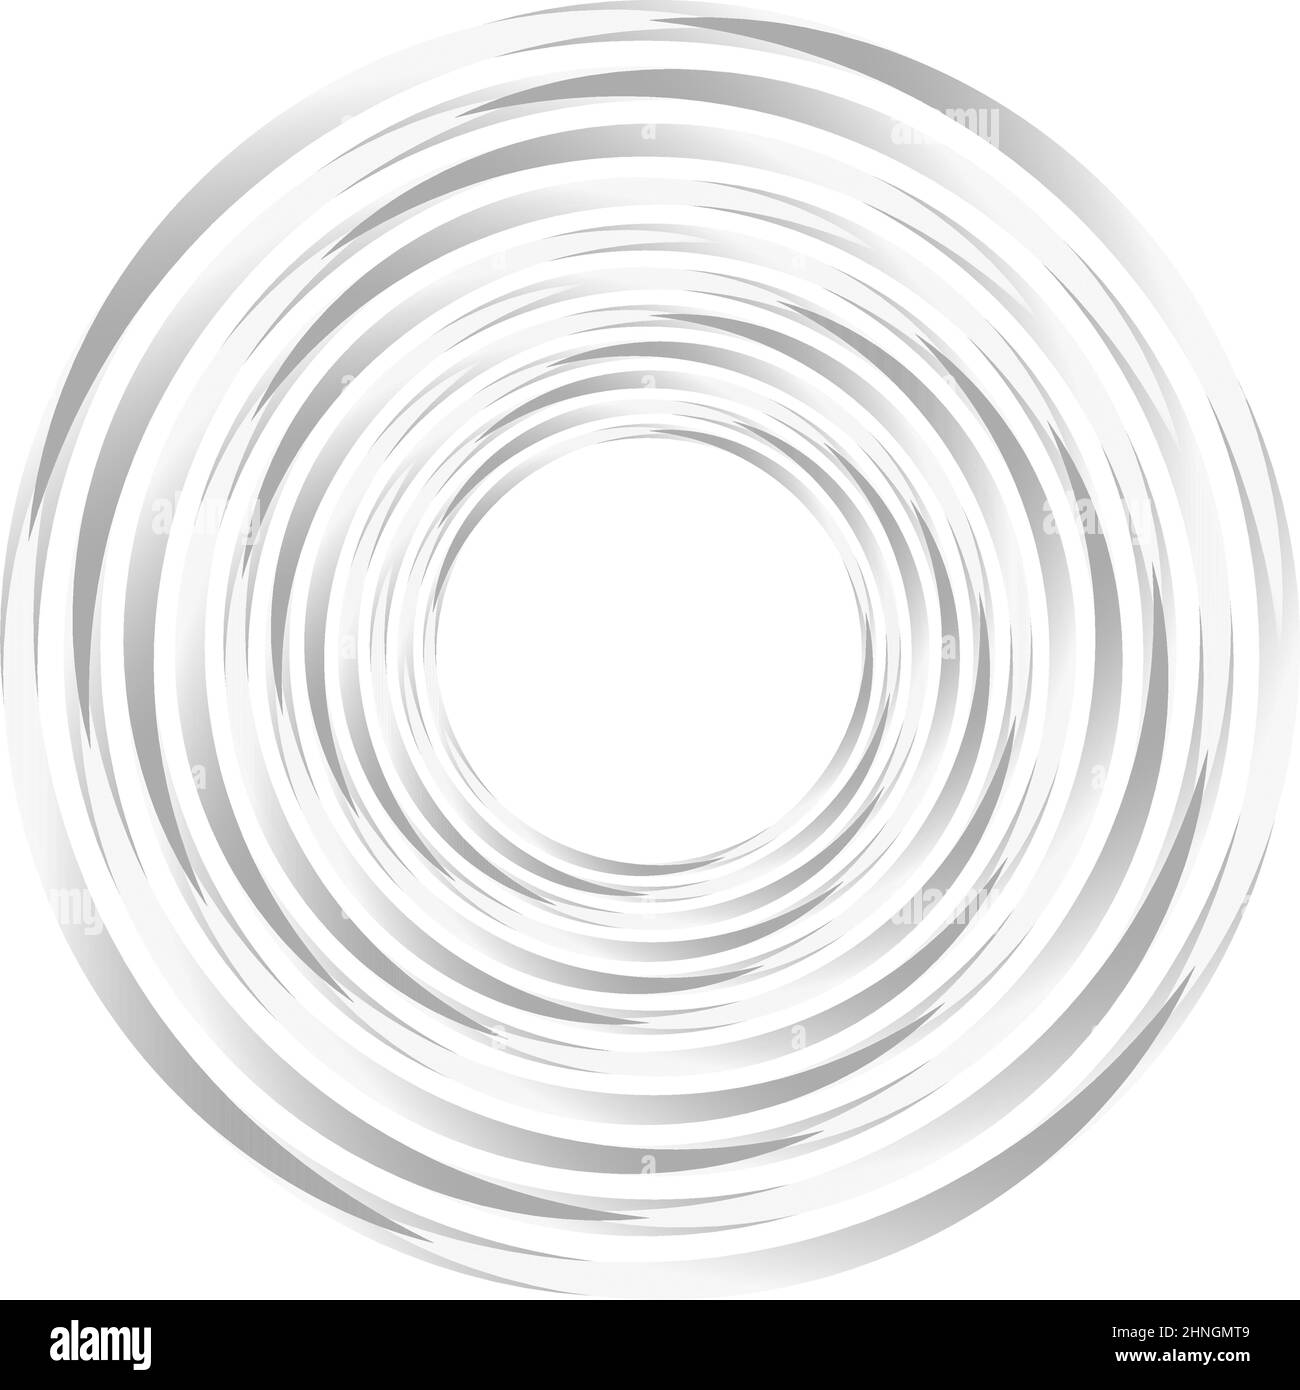 Abstract geometric circle, ring design element. Circular, concentric circlet. Swirl, twirl, spiral and vortex shape, icon, symbol - stock vector illus Stock Vector